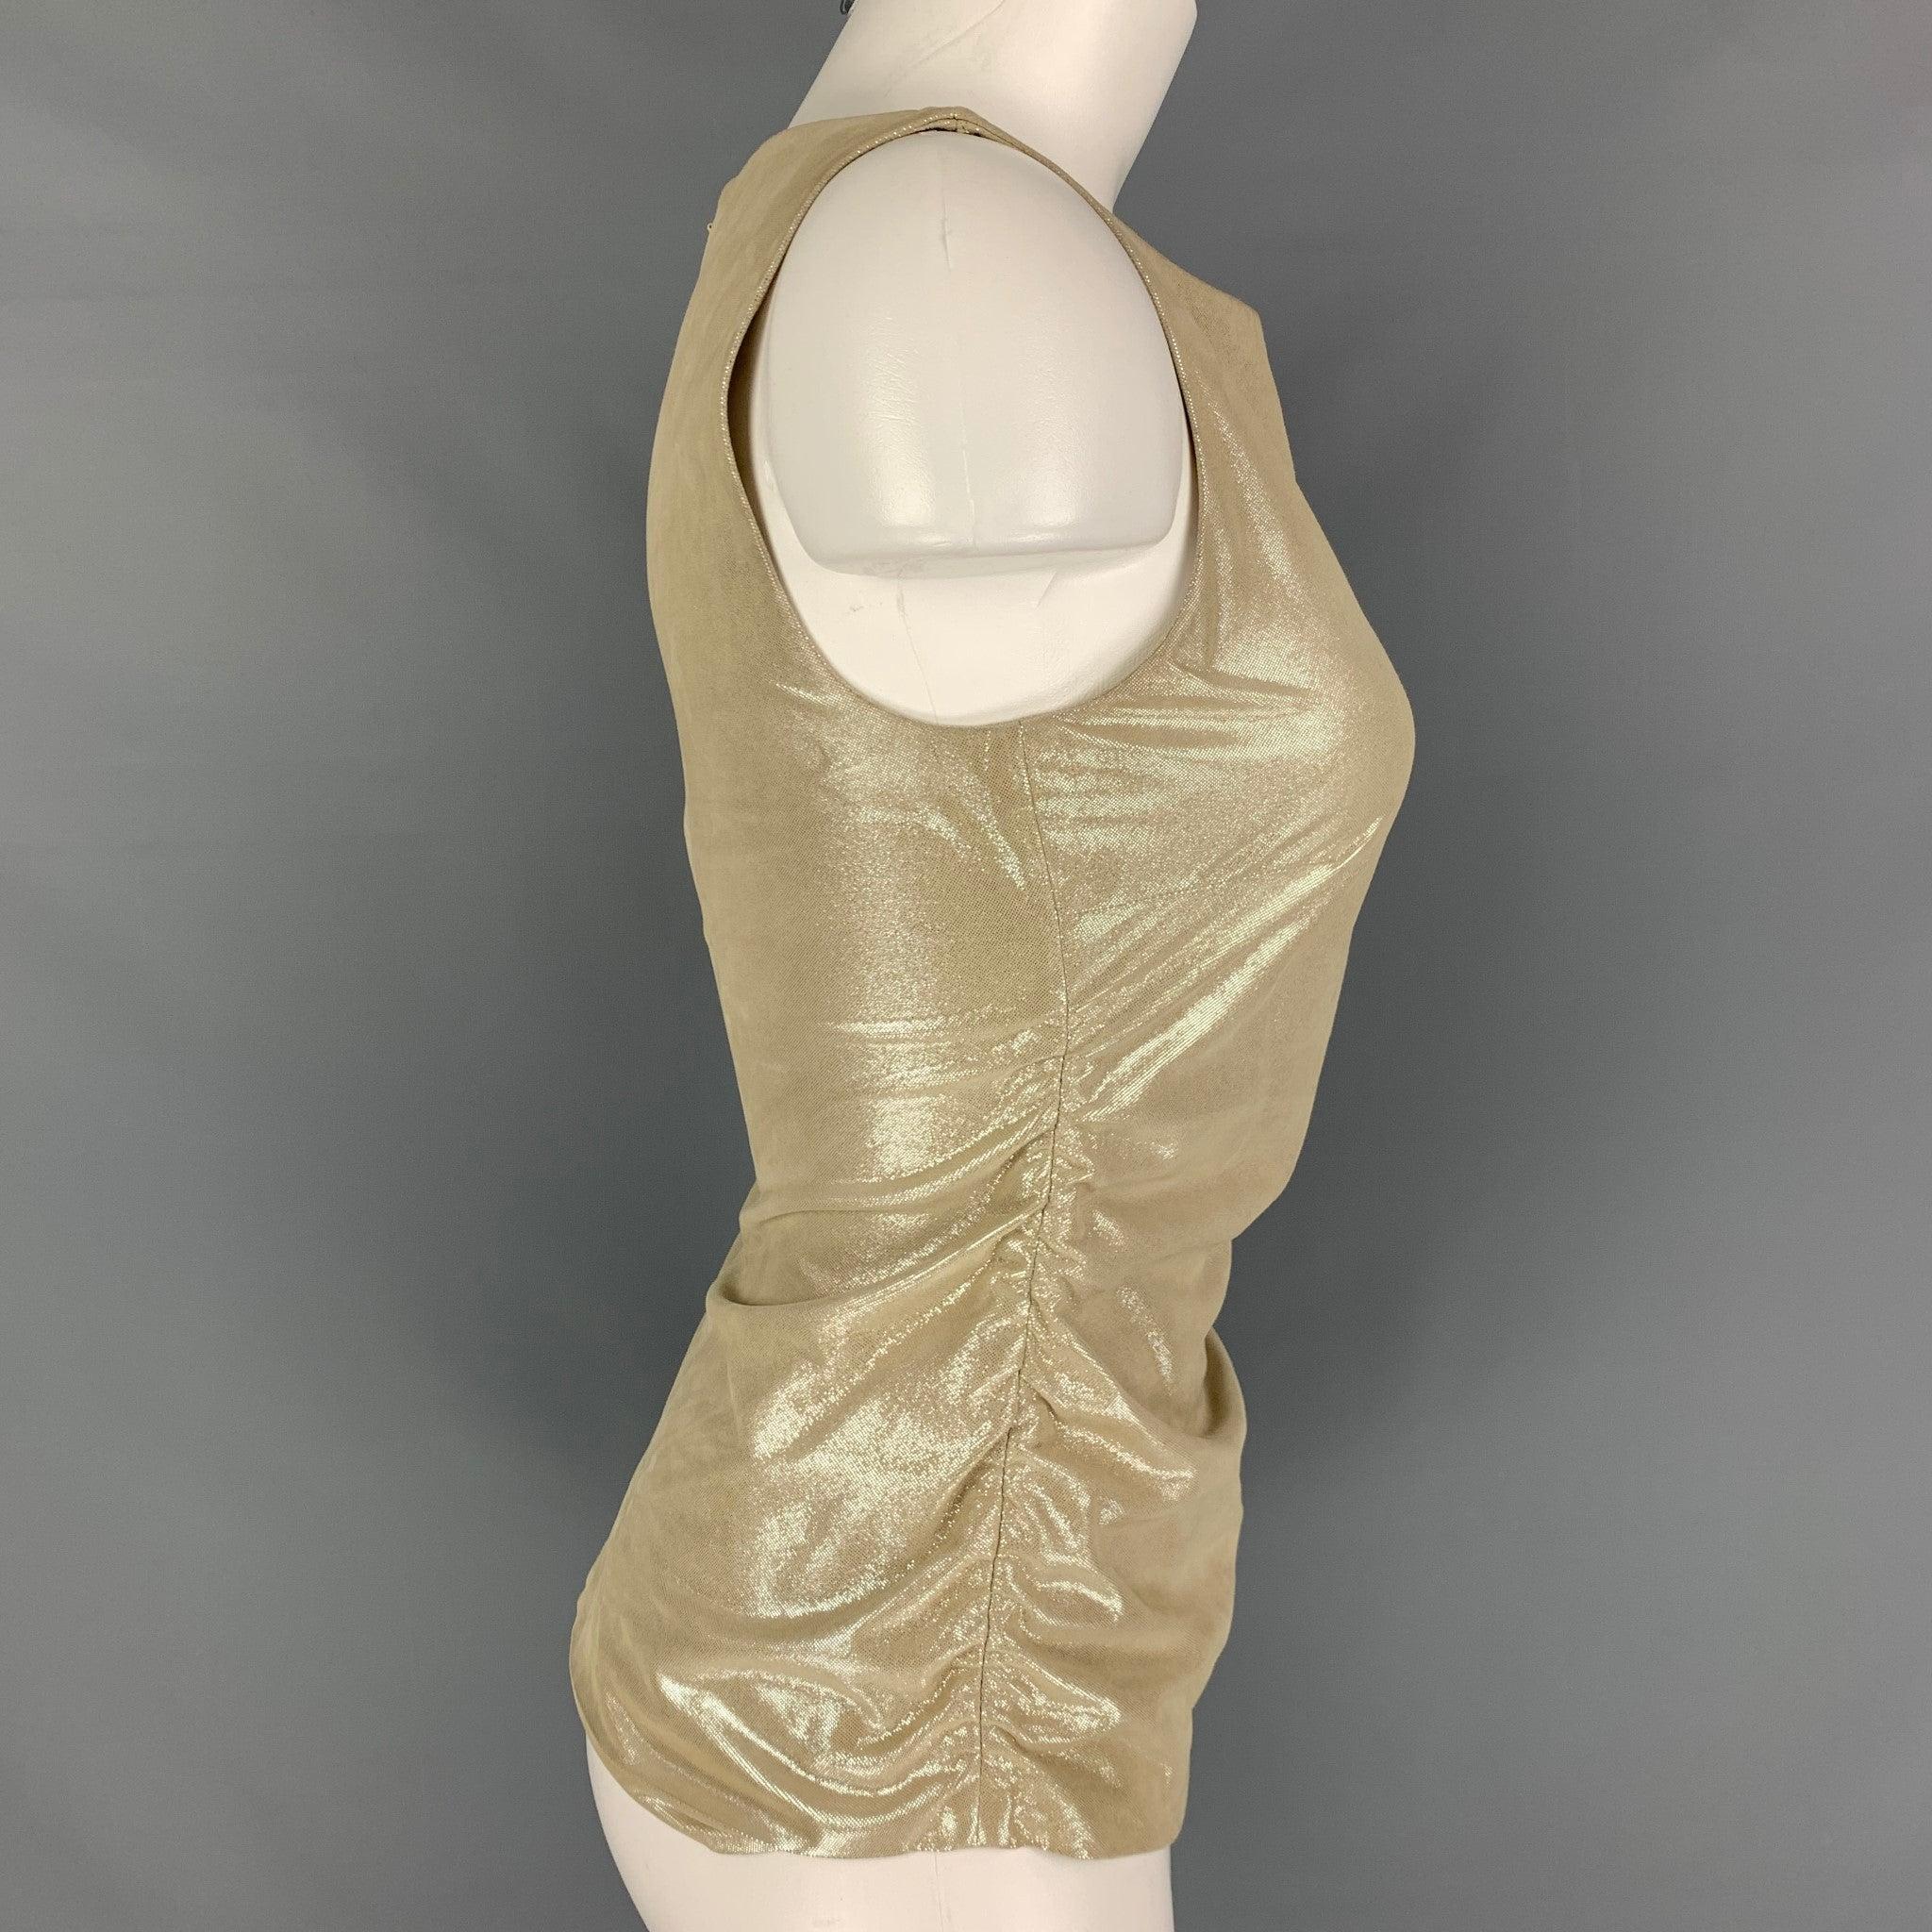 RALPH LAUREN BLACK LABEL by sleeveless pullover comes in a beige suede featuring a sleeveless style, silver metallic finishing, and a full length invisible zipper. Made in Italy. Very Good Pre-Owned Condition. Minor signs of wear. 

Marked:   2